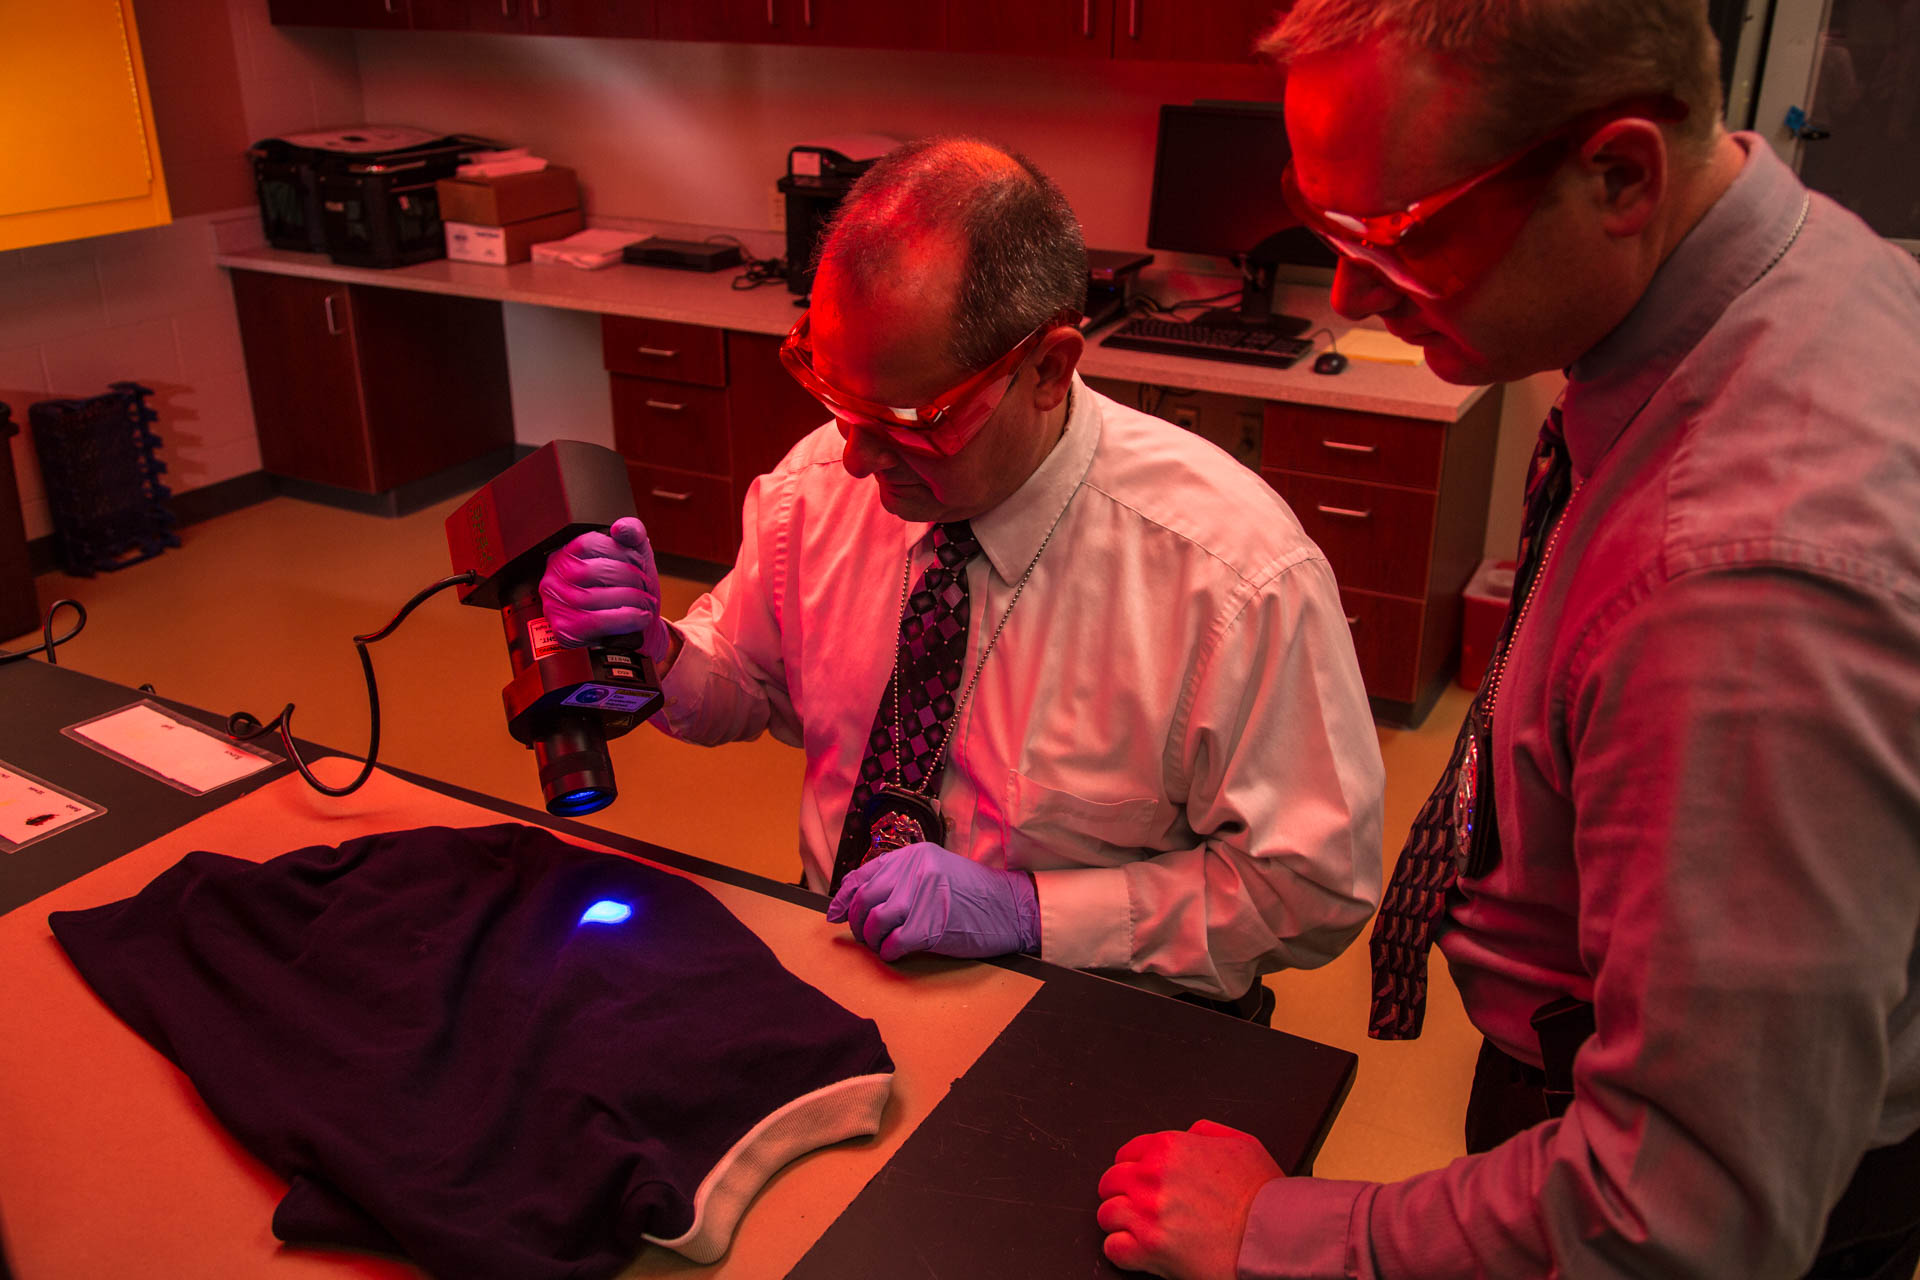 ecpd-detectives-solving-case-with-black-light-looking-for-fluid